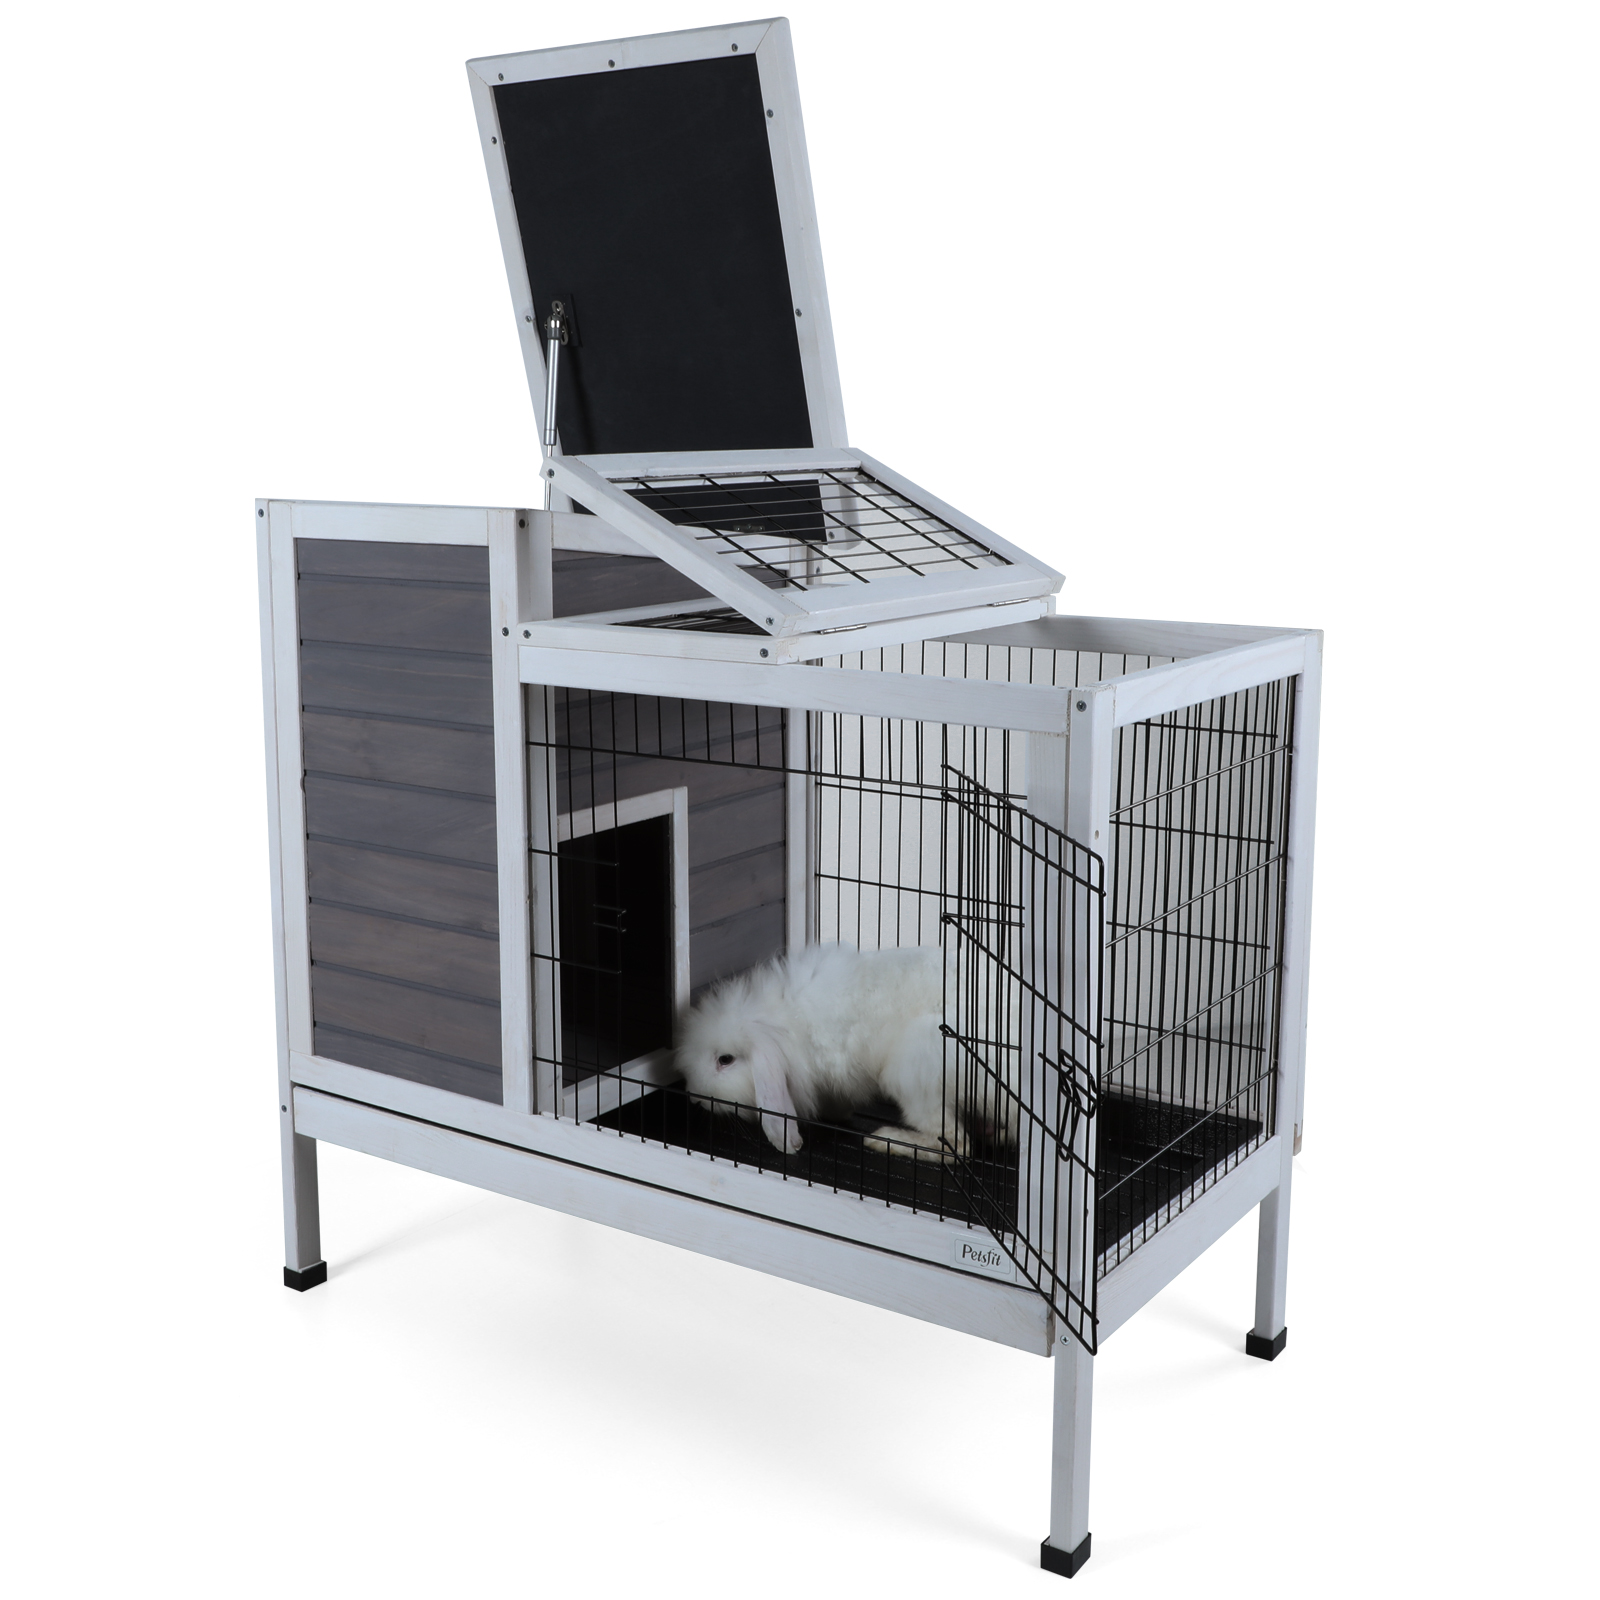 Rabbit Hutch Outdoor Petsfit 42.5 x 30 x 46 inches Bunny Cages 